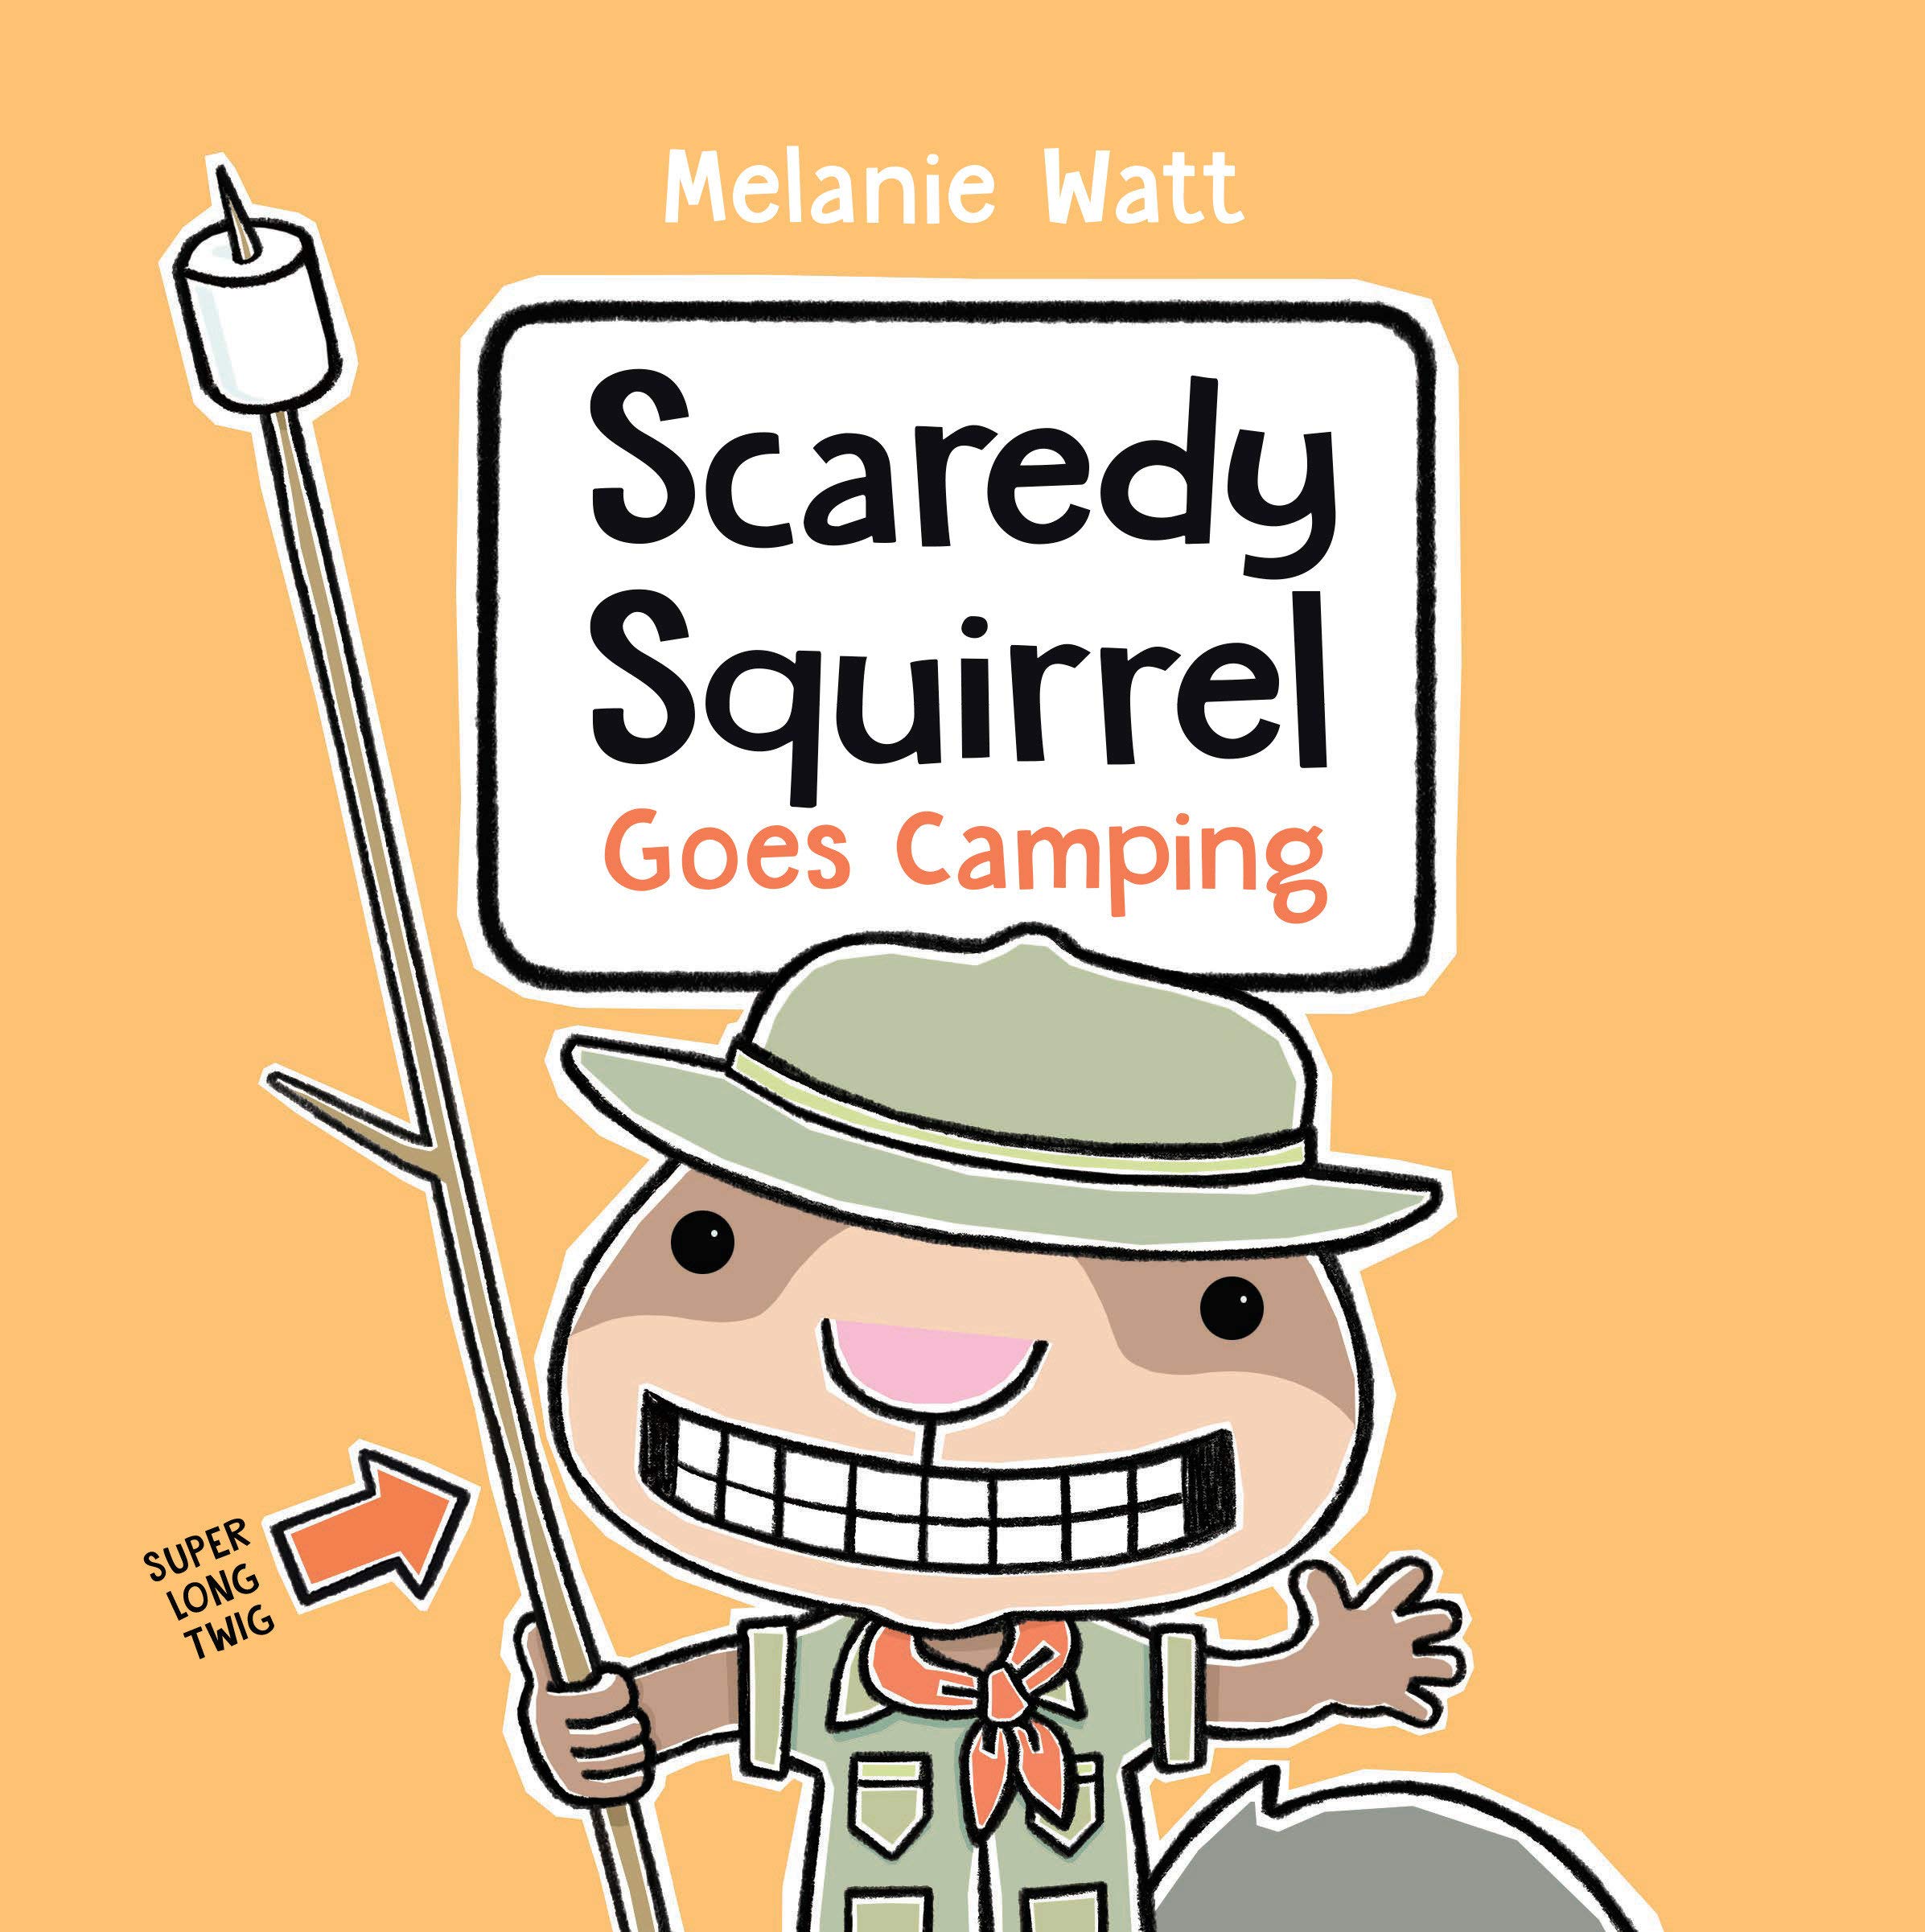 speech and language teaching concepts for Scaredy Squirrel Goes Camping in speech therapy​ ​